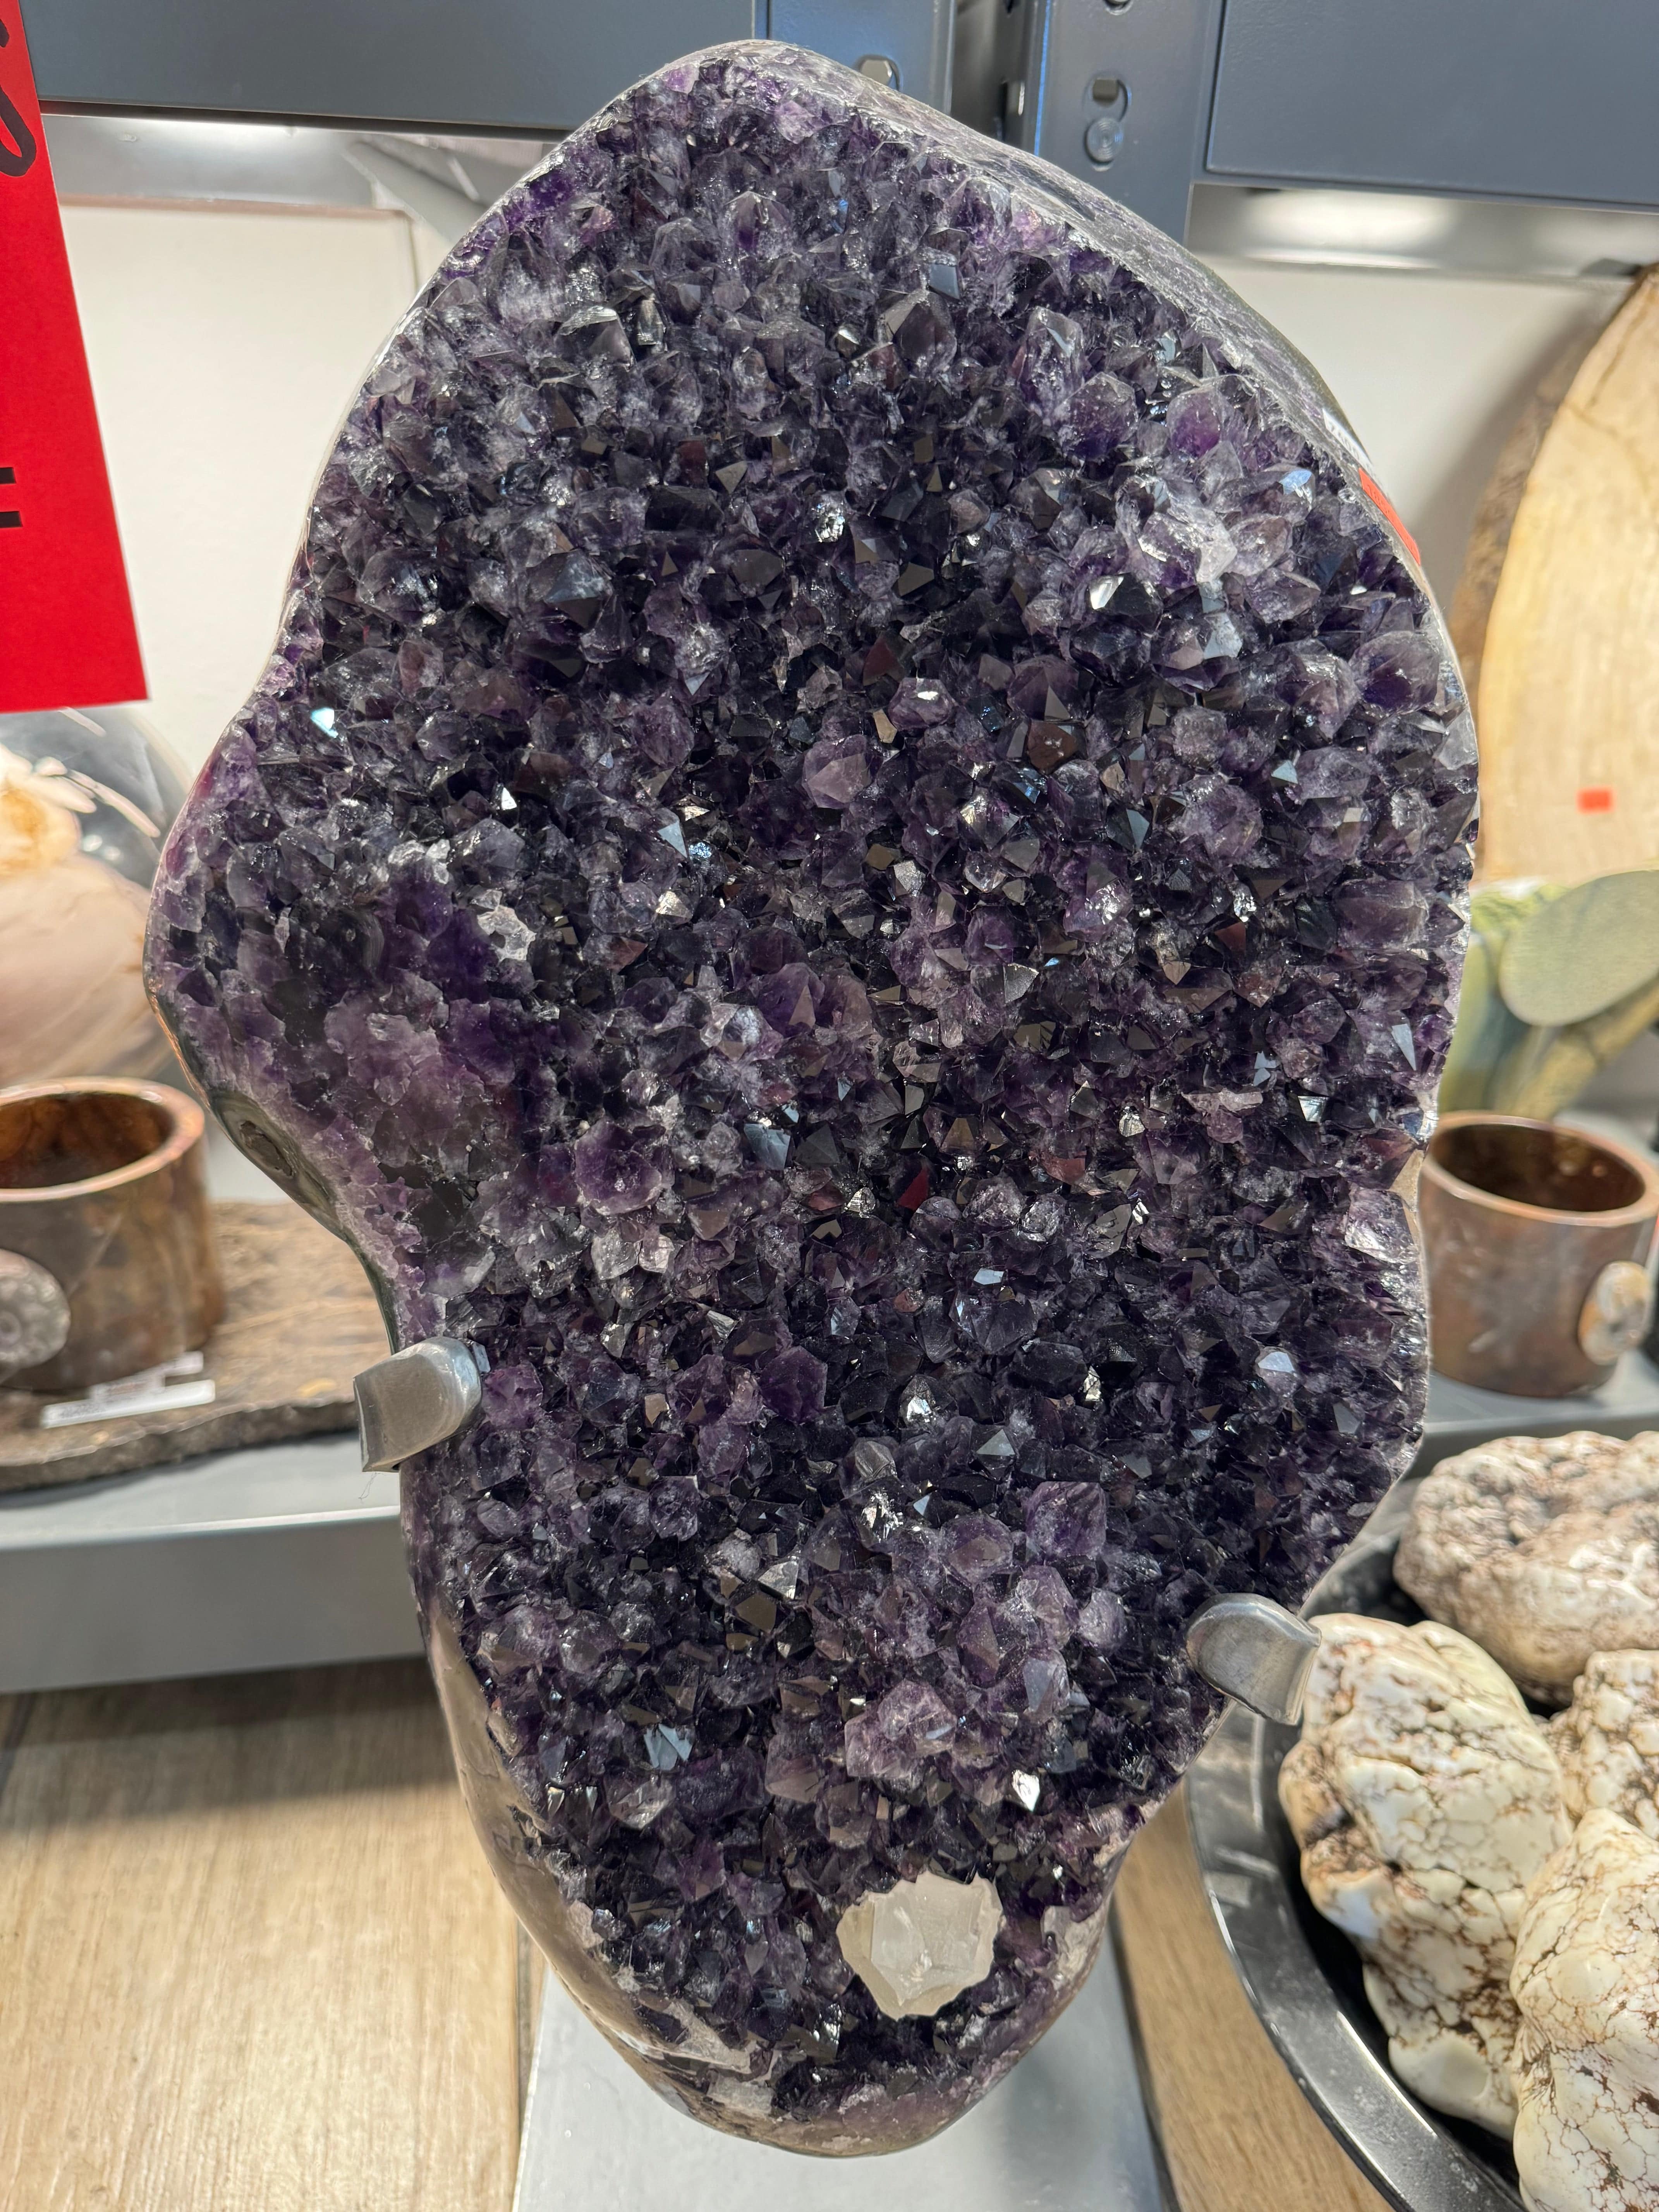 Kalifano Amethyst Uruguayan Amethyst Geode (with Calcite) on Custom Stand - 23" / 52 lbs UAG14800.001